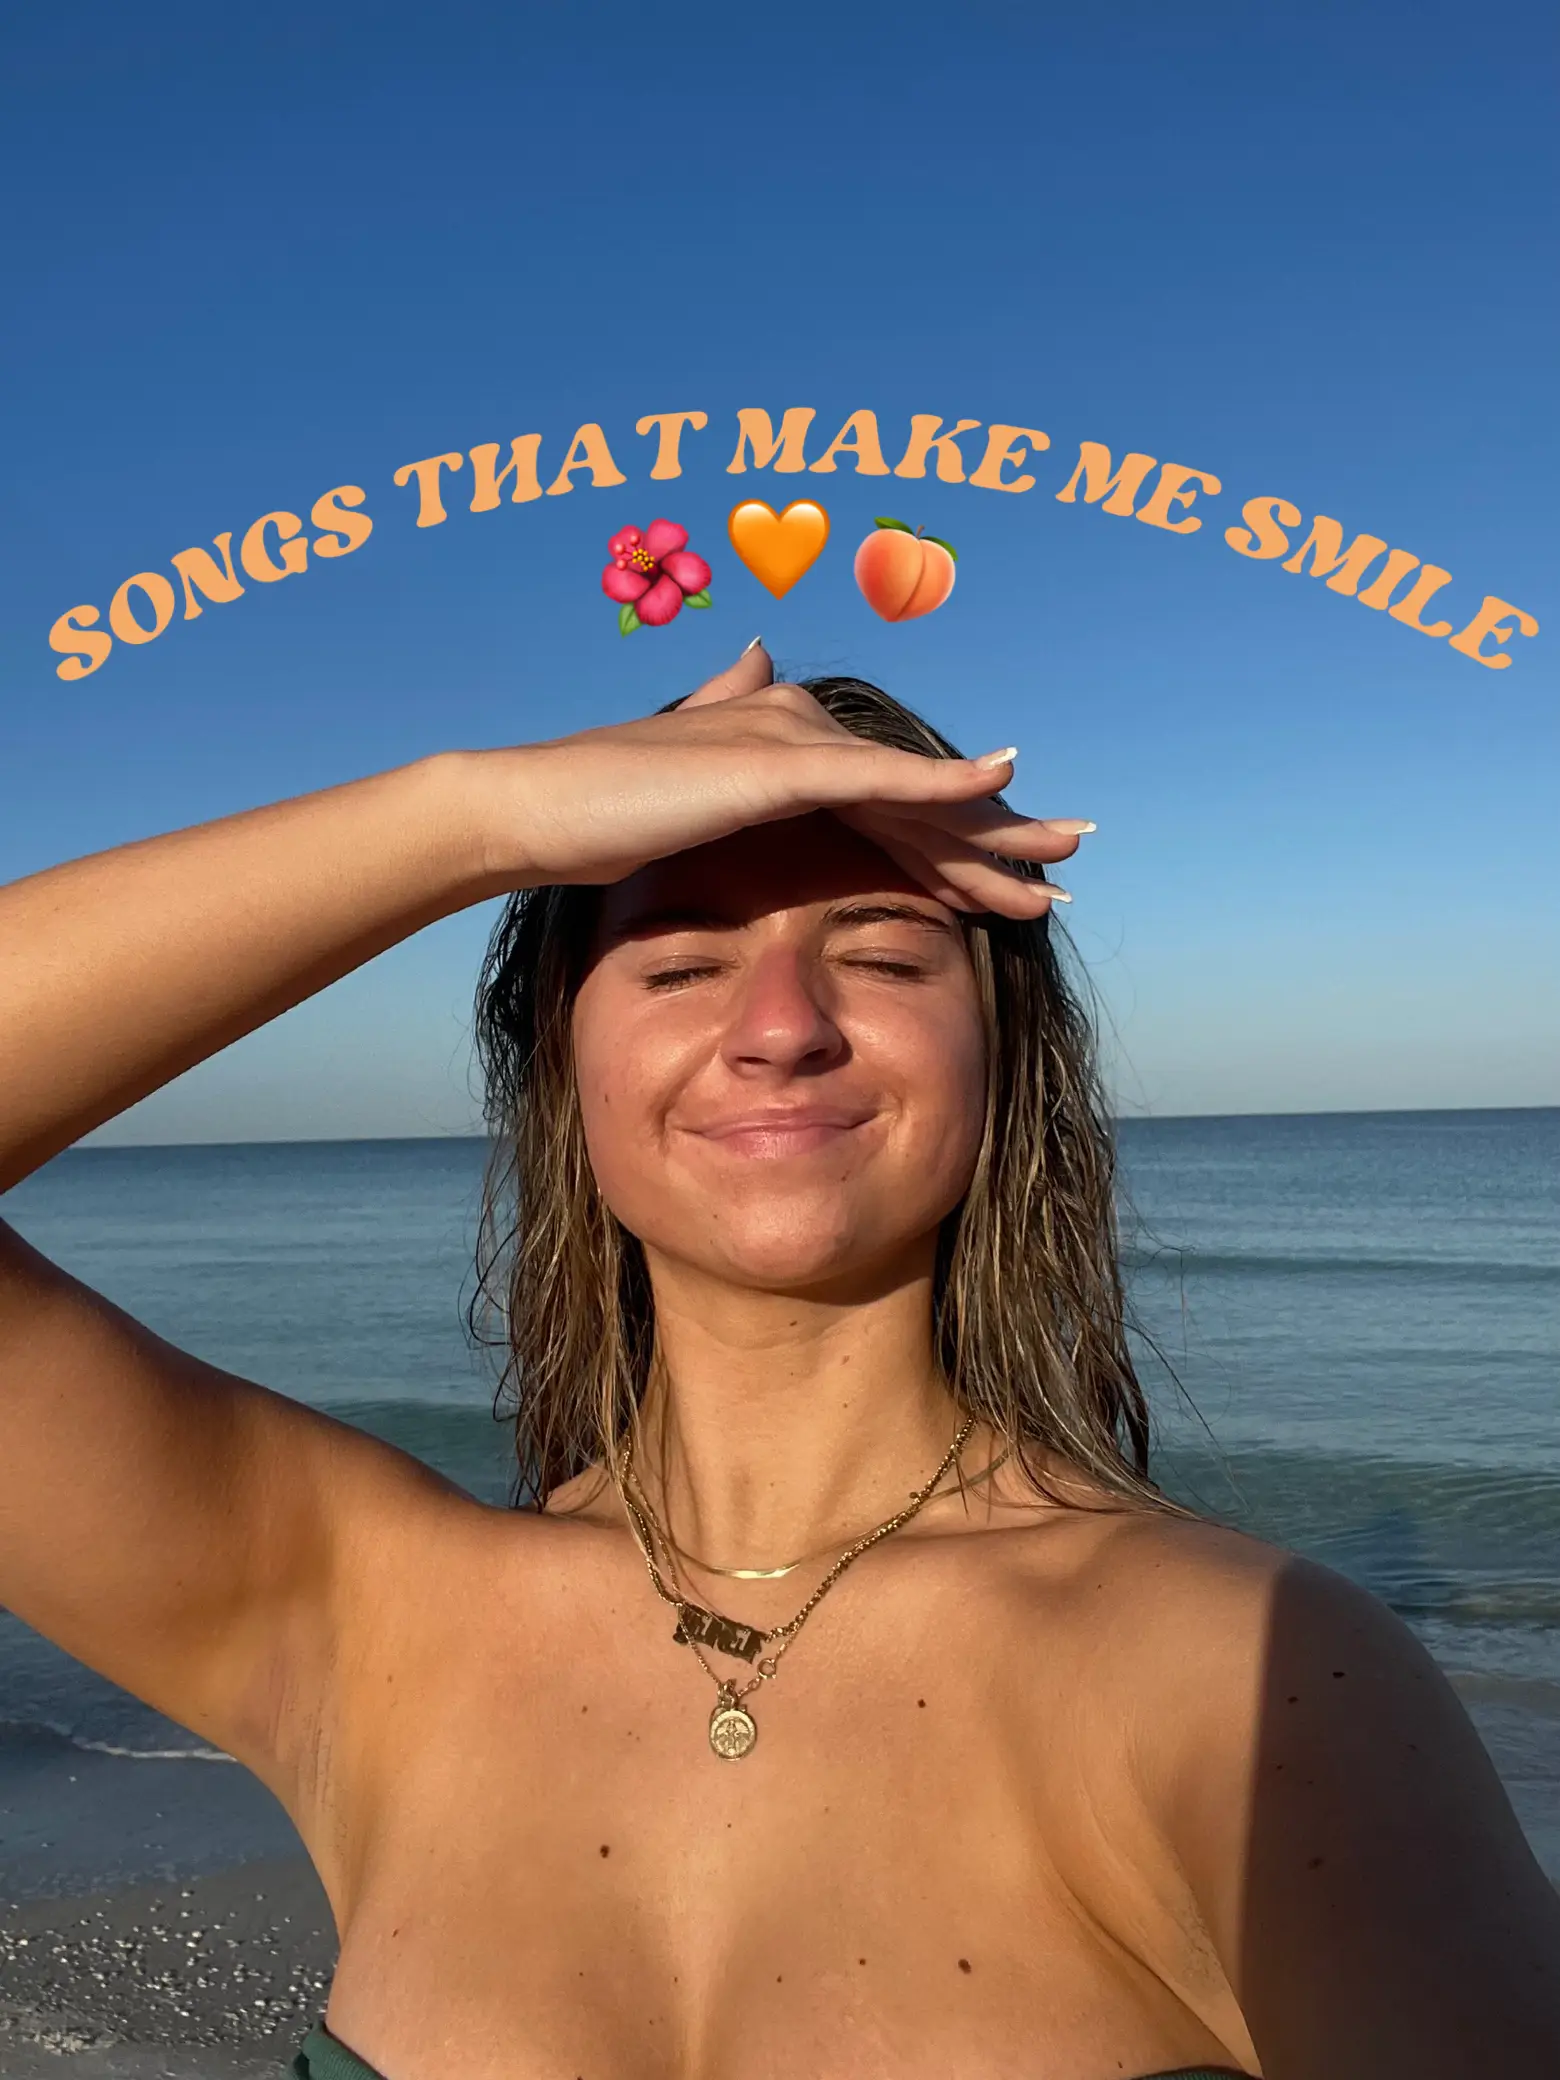 a playlist to make u happy 🫶🏼's images